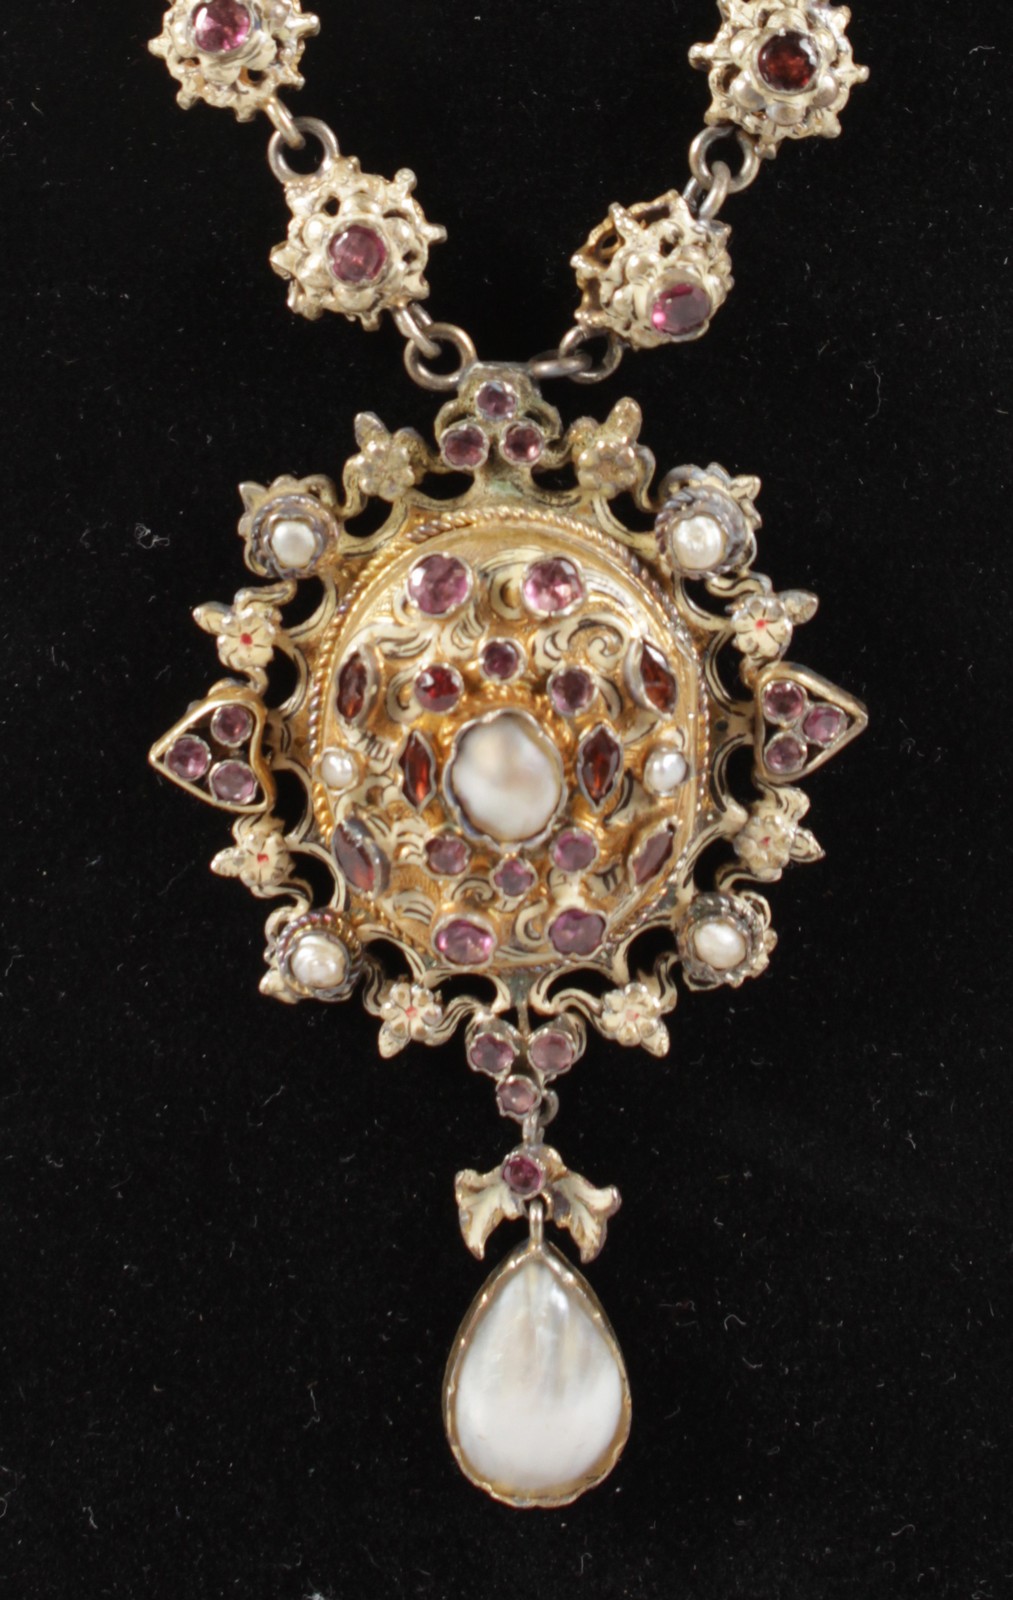 A LOVELY 19TH CENTURY RUSSIAN NECKLACE, PENDANT AND LOCKET inset with semi-precious stones and - Image 2 of 5